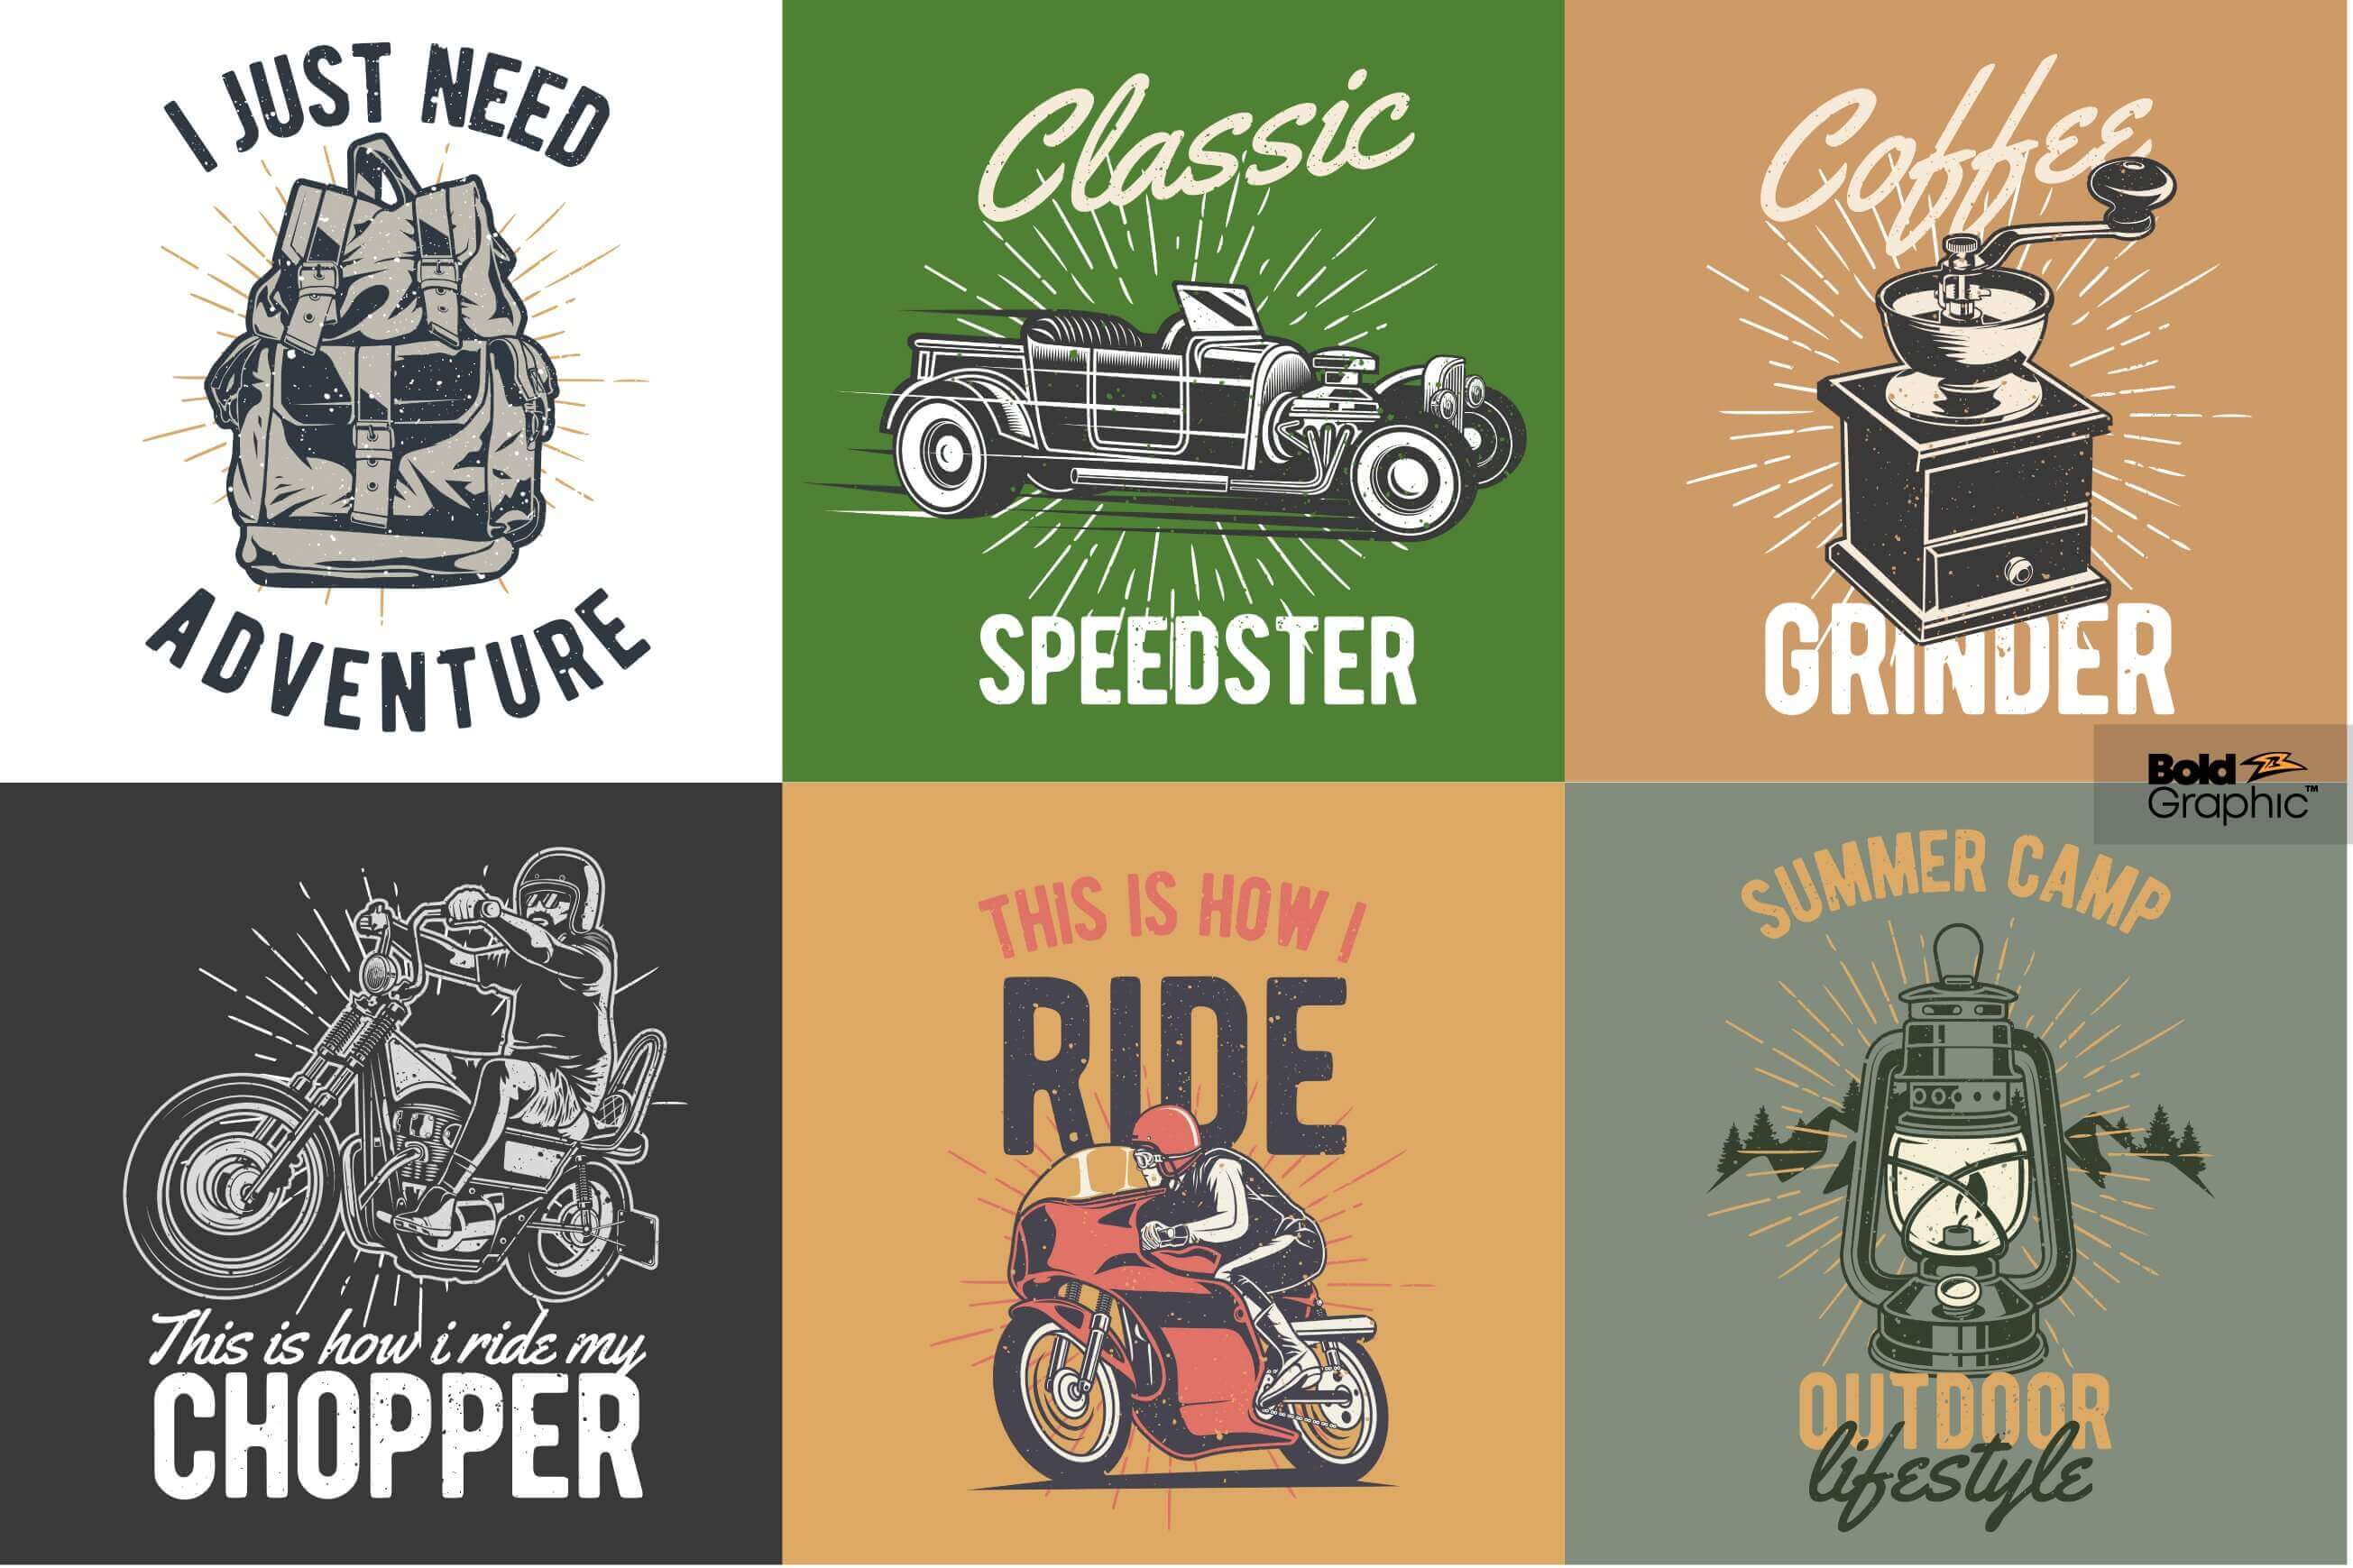 Classic designs about cars, motorcycles, backpacks, T-shirt coffee grinder.